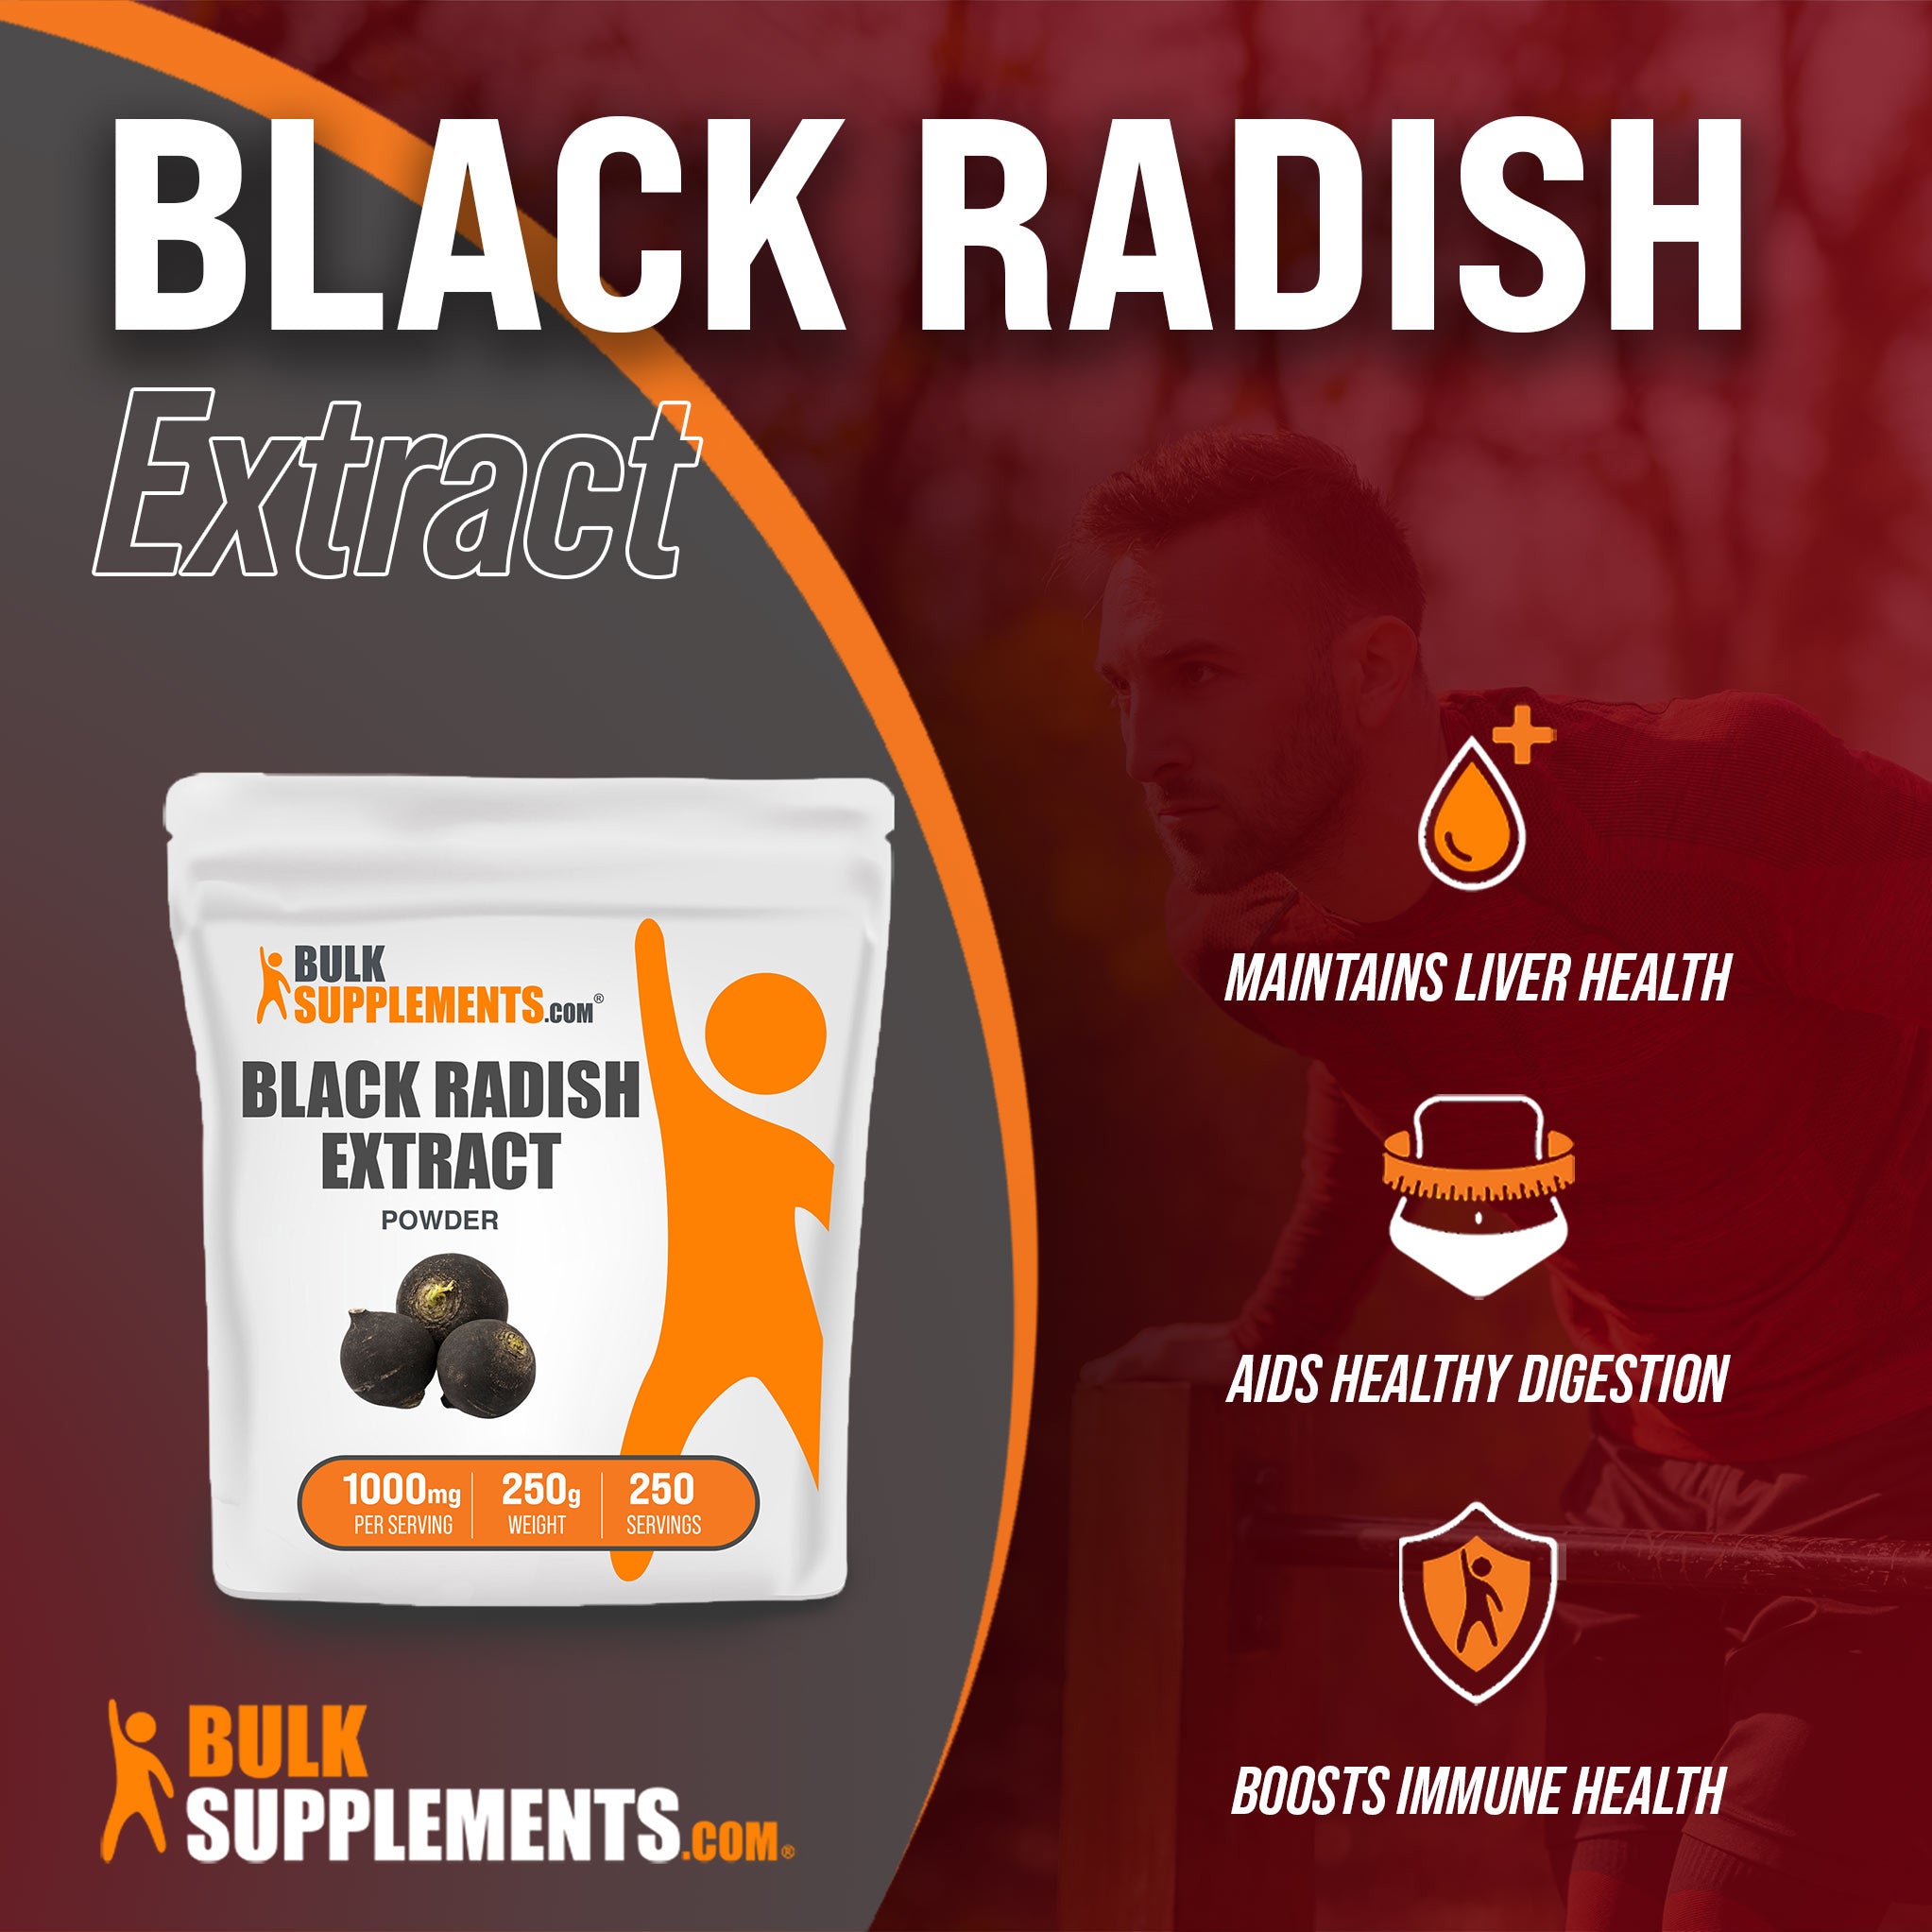 250g of Black Radish Extract is an ideal liver supplement